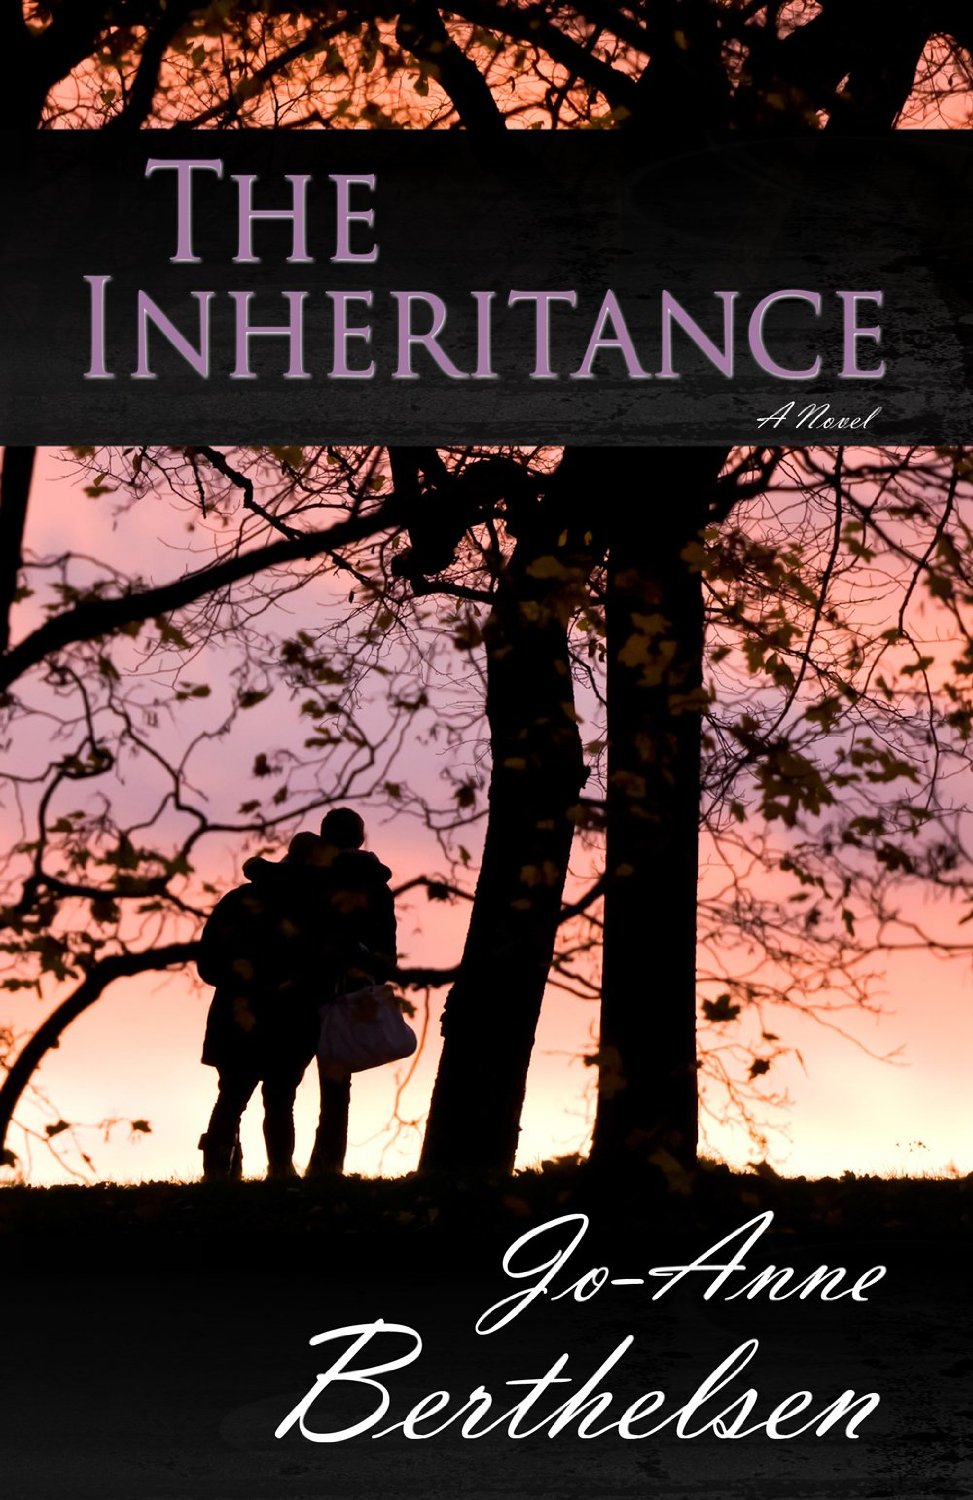 You are currently viewing Video of the Week: The Inheritance by Jo-Anne Berthelsen